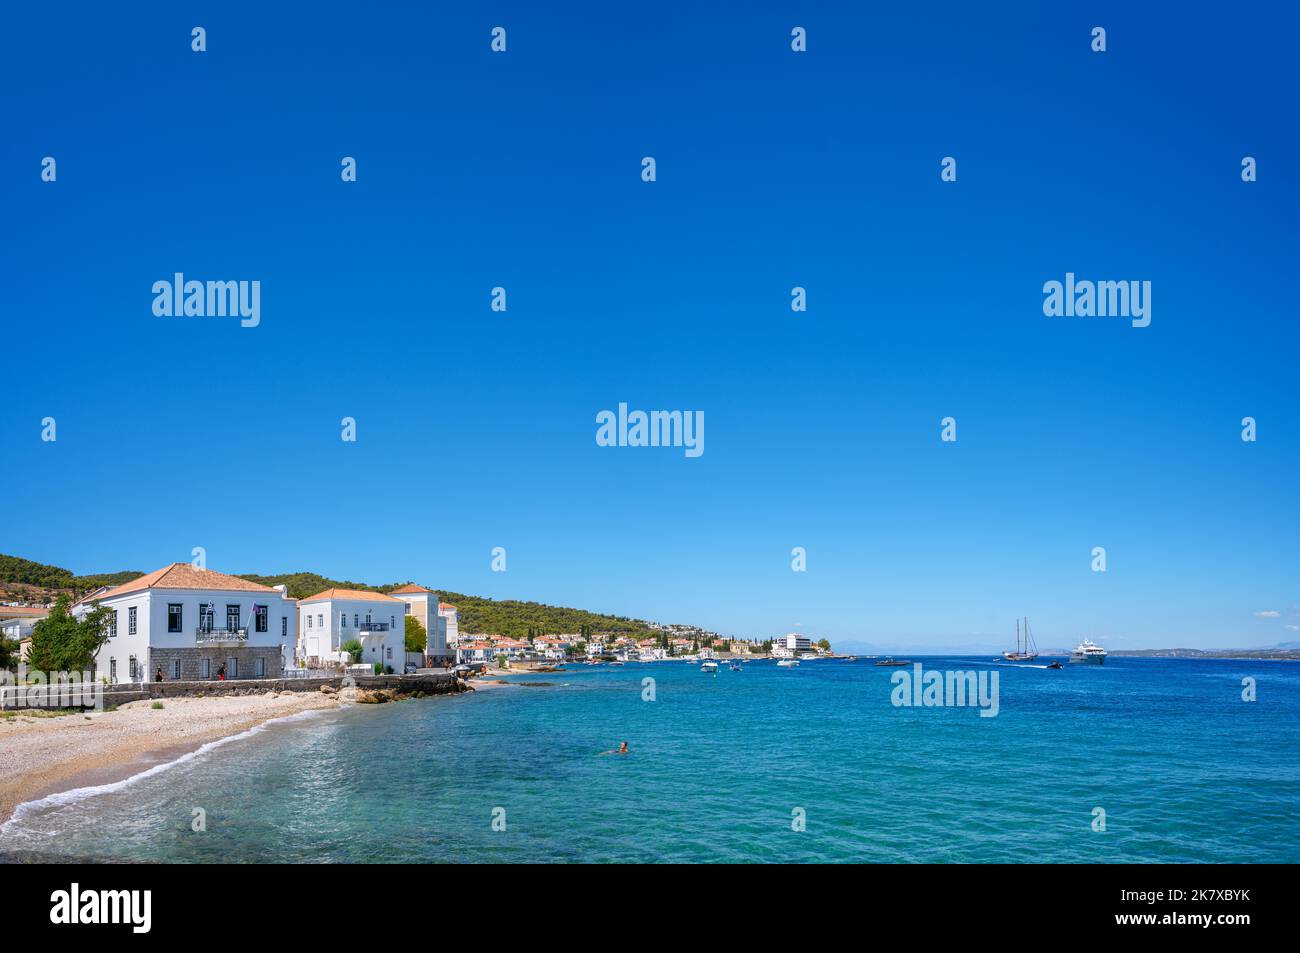 Beach in Spetses Town, Spetses, Saronic Islands, Greece Stock Photo